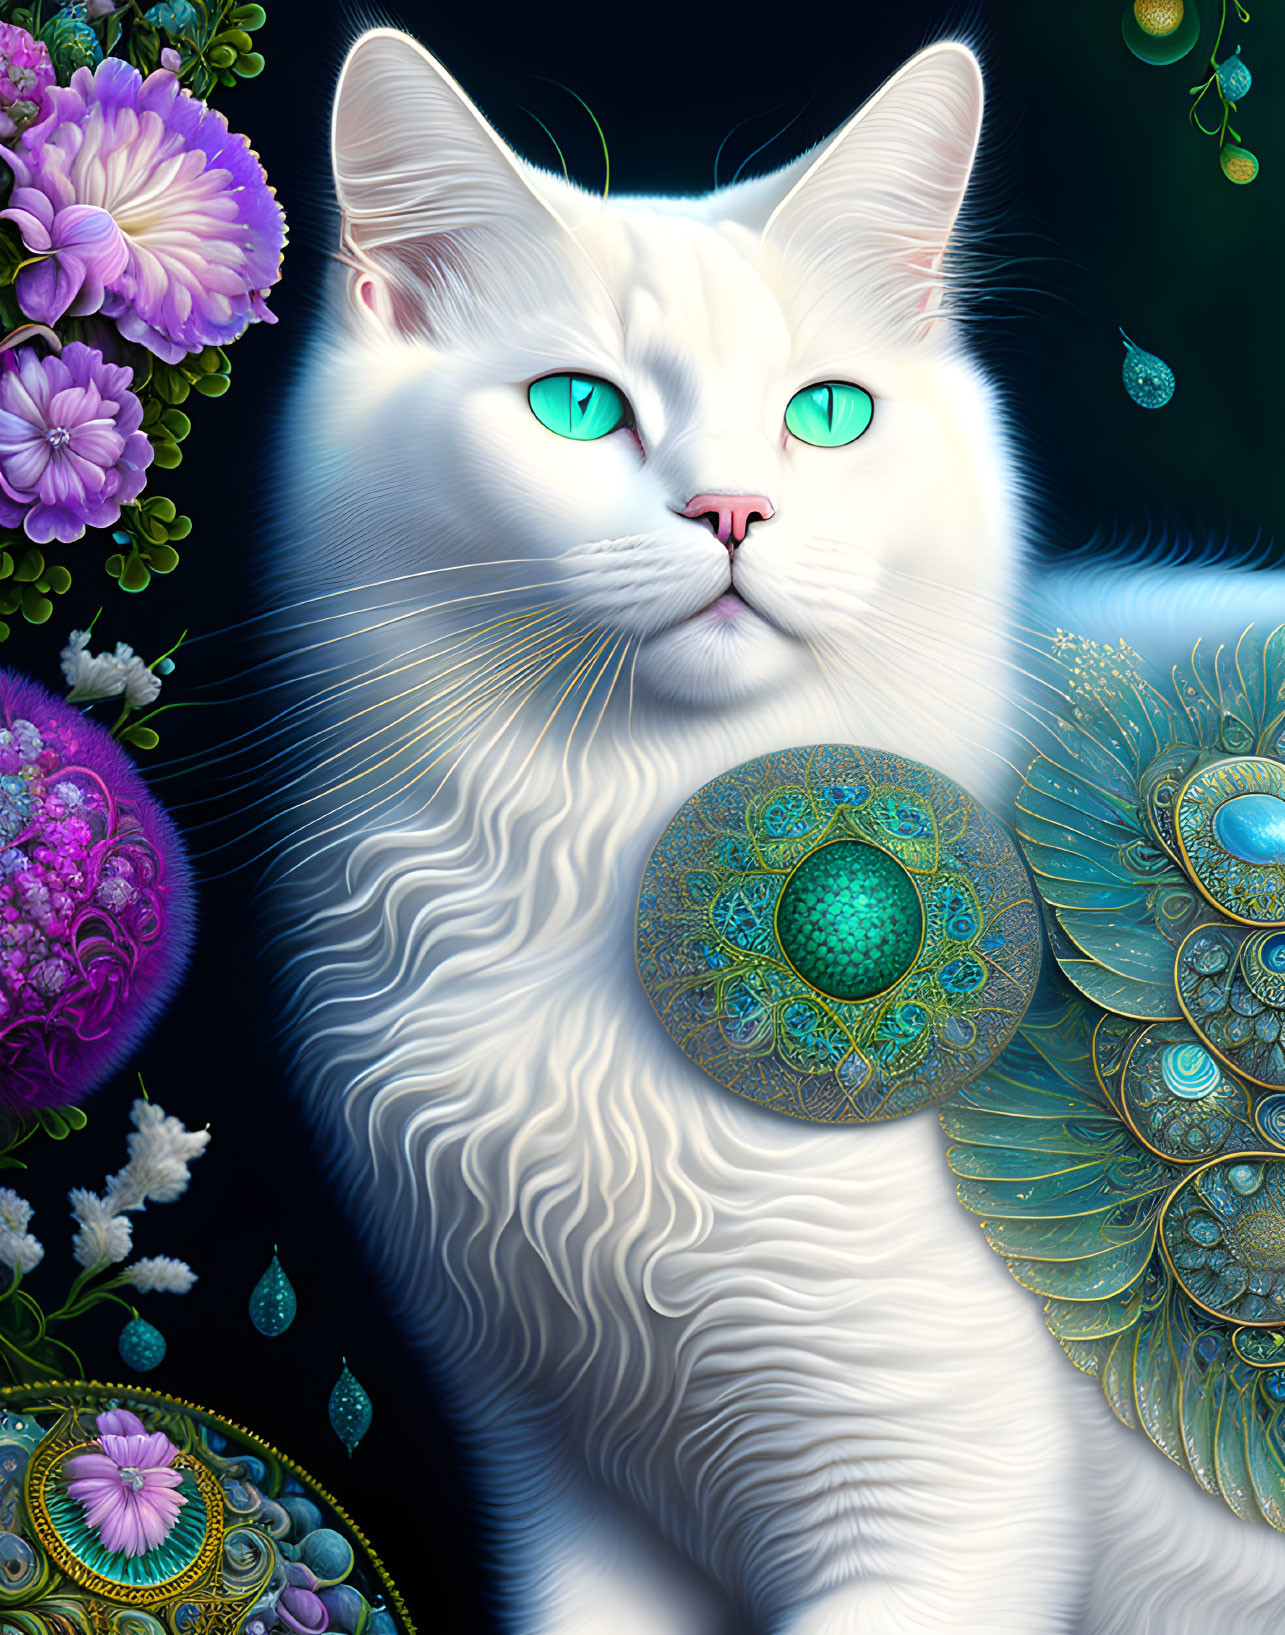 White Cat with Turquoise Eyes and Peacock Feather Patterns in Vibrant Floral Setting